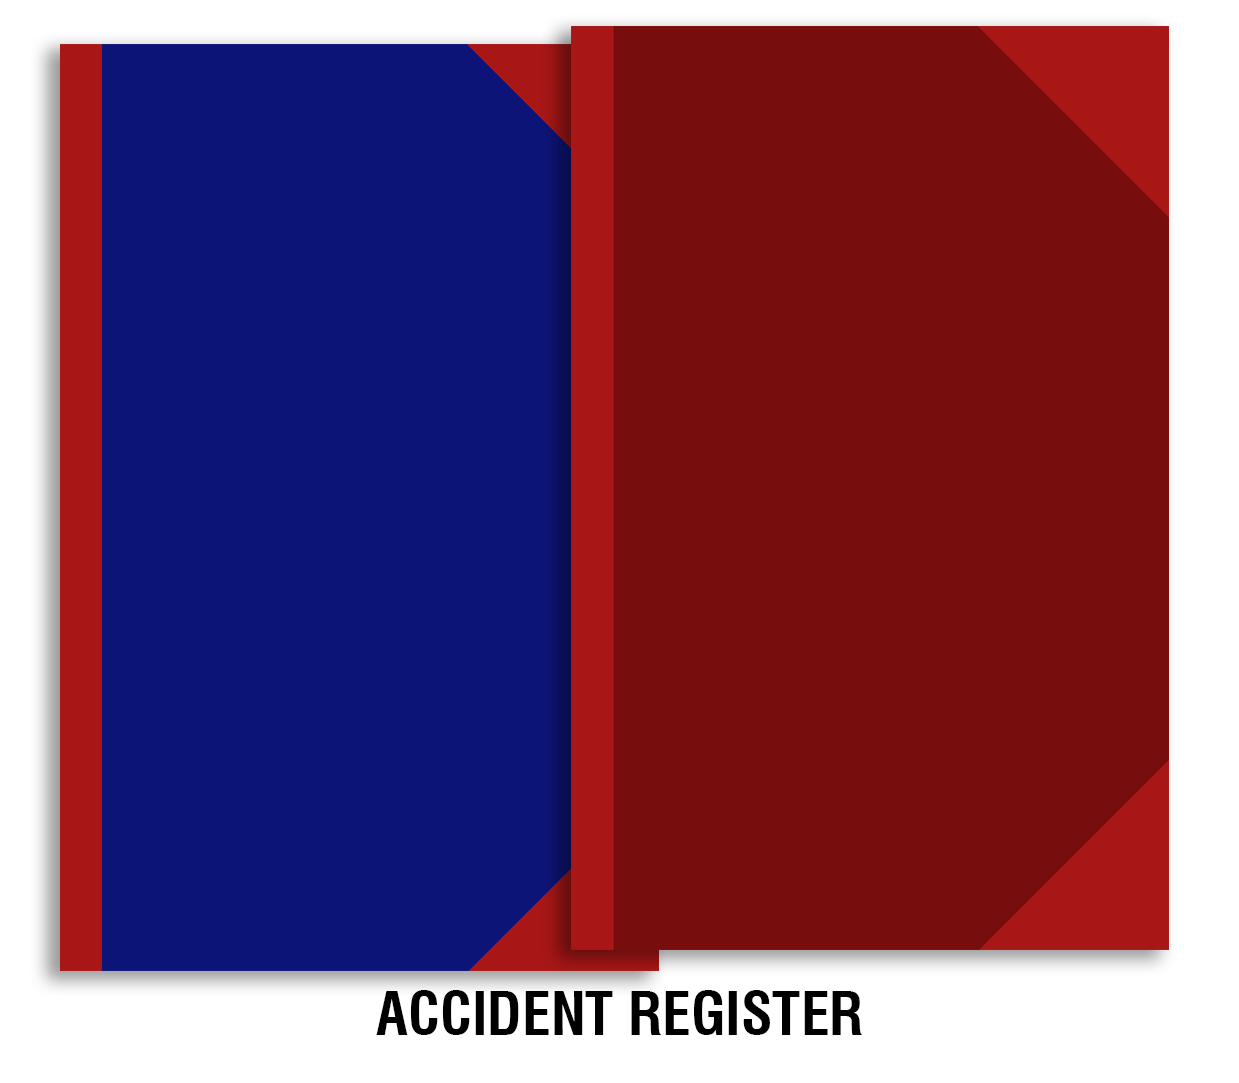 Trison Accident Register | 70 GSM | Quire 1 (64 pages) | Archival quality acid-free green ledger paper | Manually stitched and red canvas hardbound (R/B binding) | PVC rexine cover | Pre-printed format | Size: 21.5x34 cm | Factory act register | Factory act | factory | accident | accident book | factories act 1948 | register of accidence